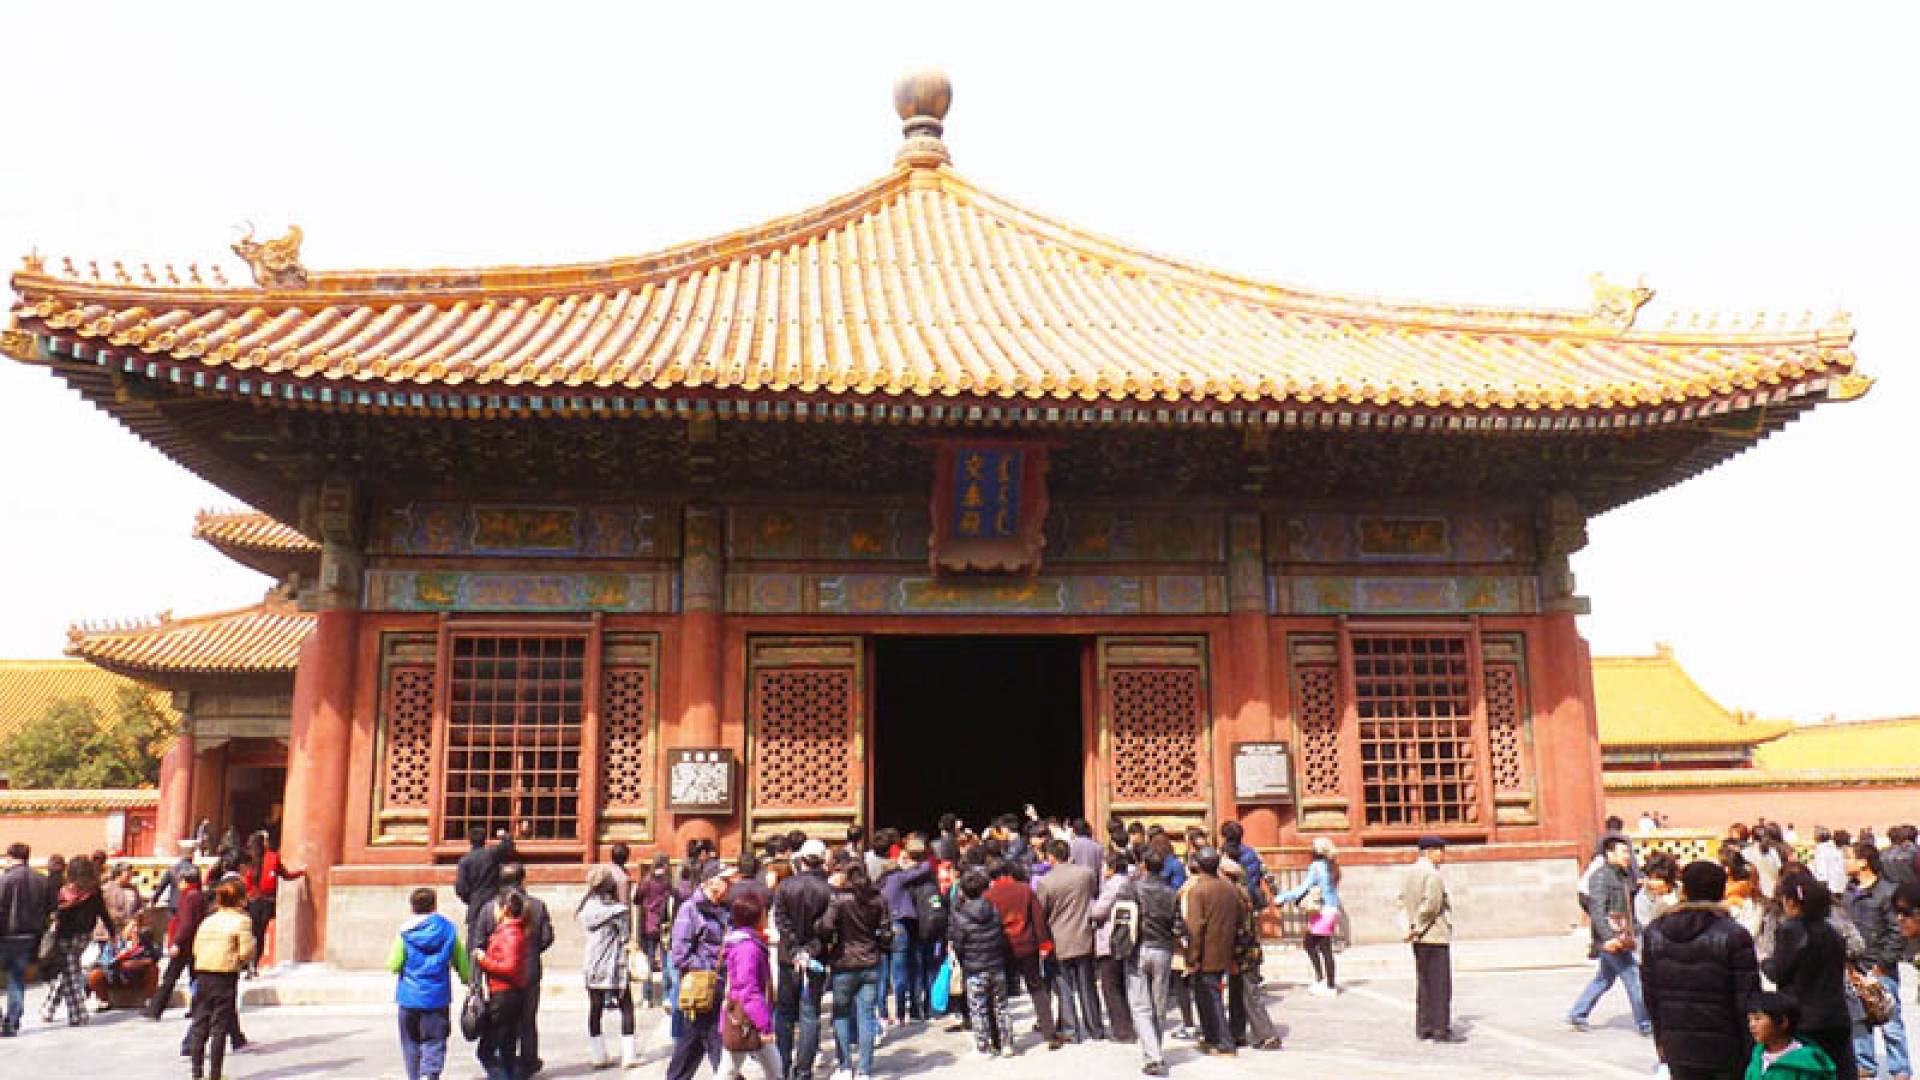 THE FORBIDDEN CITY, Hall Of Celestial And Terrestrial Union And Palace Of Earthly Tranquility